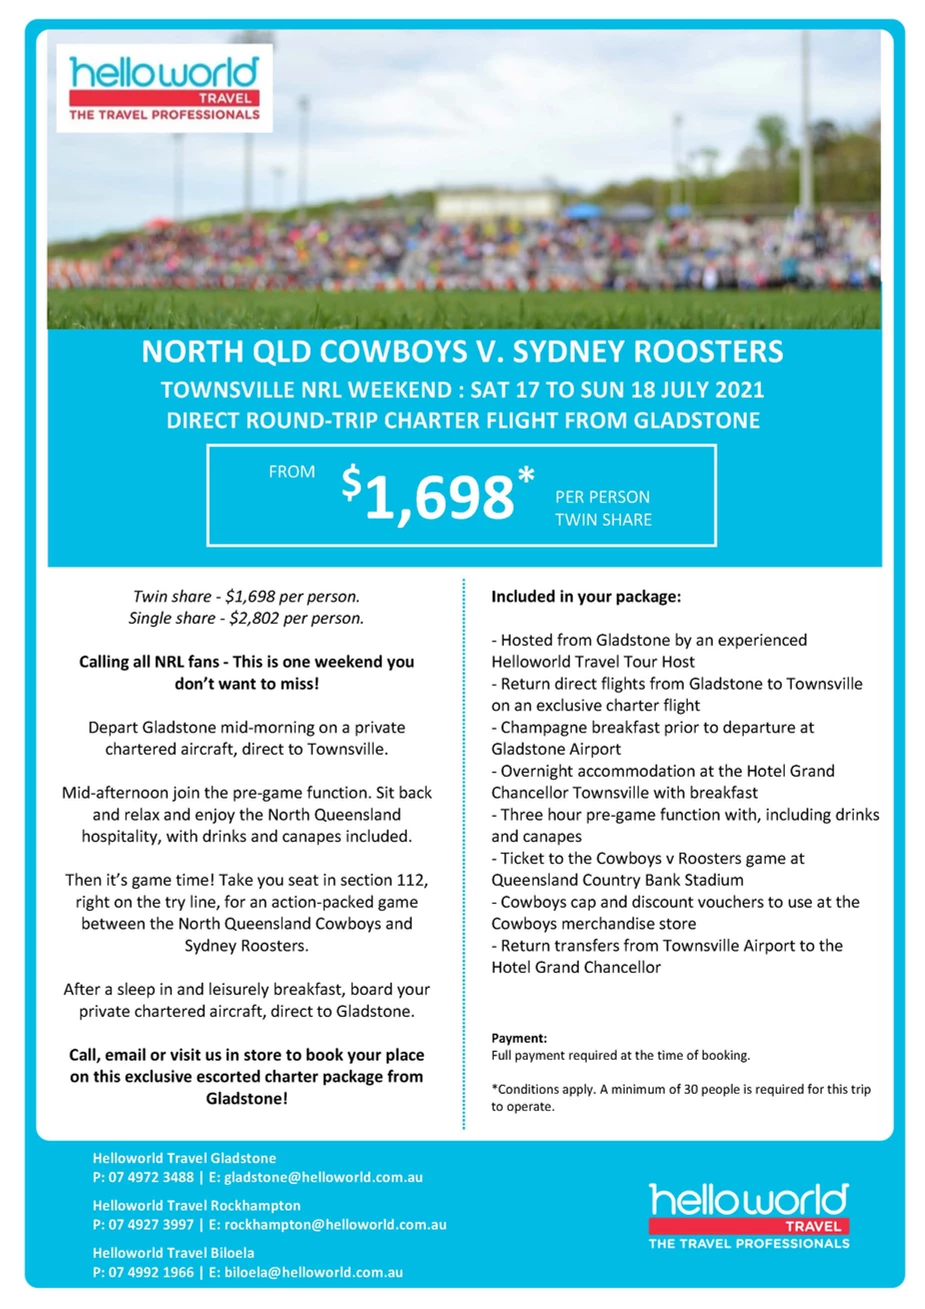 North QLD Cowboys Vs Sydney Roosters